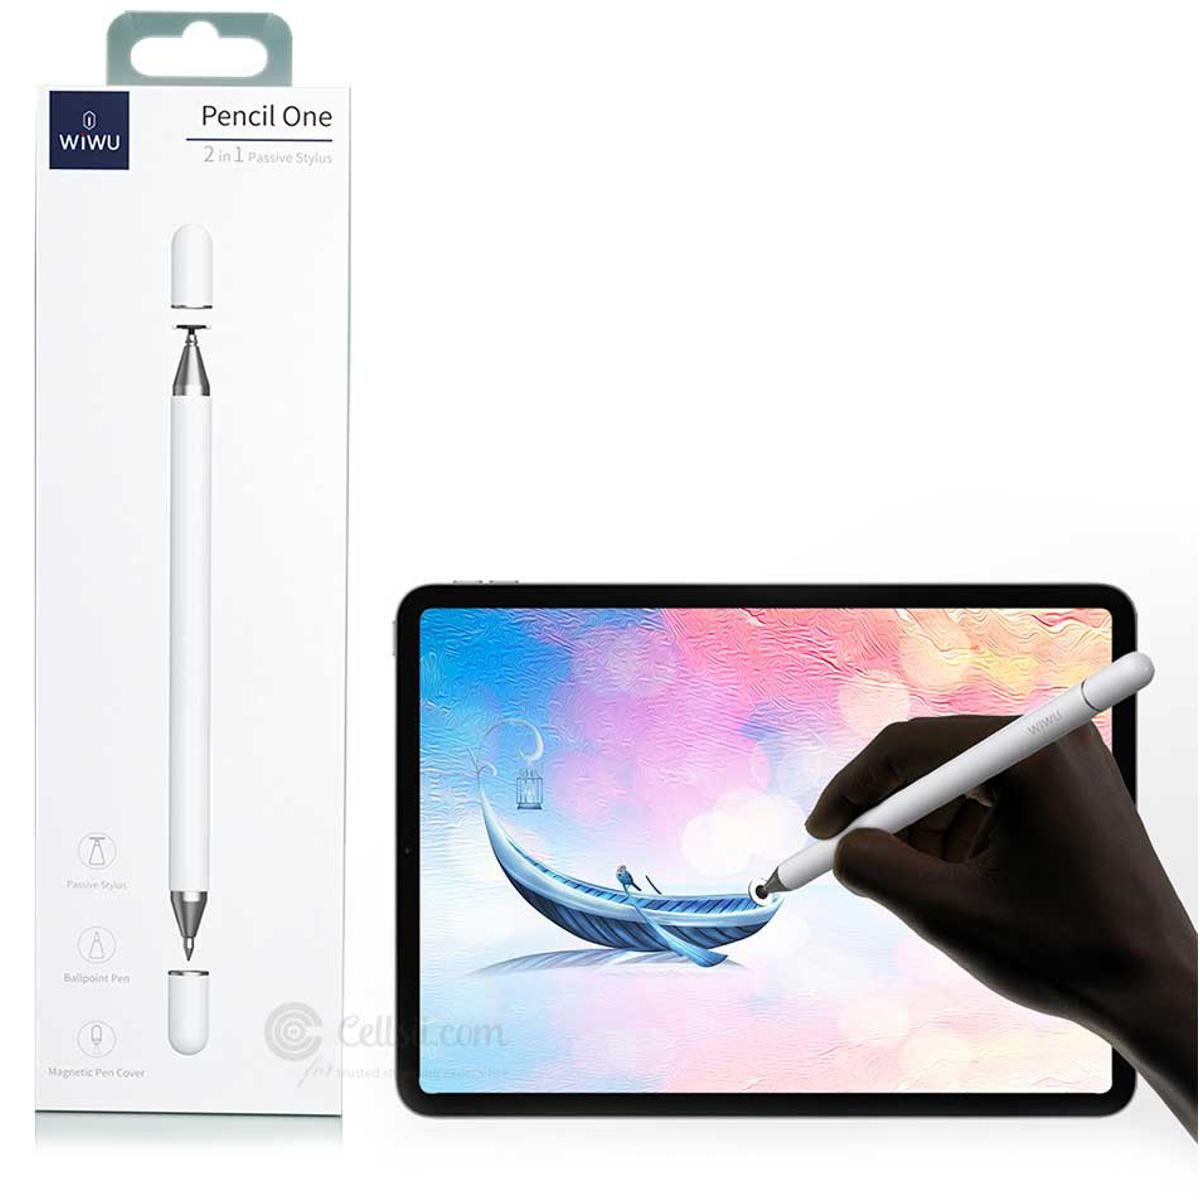 WiWU Pencil One 2 in 1 Passive Stylus FOR Apple Android & Microsoft System - White